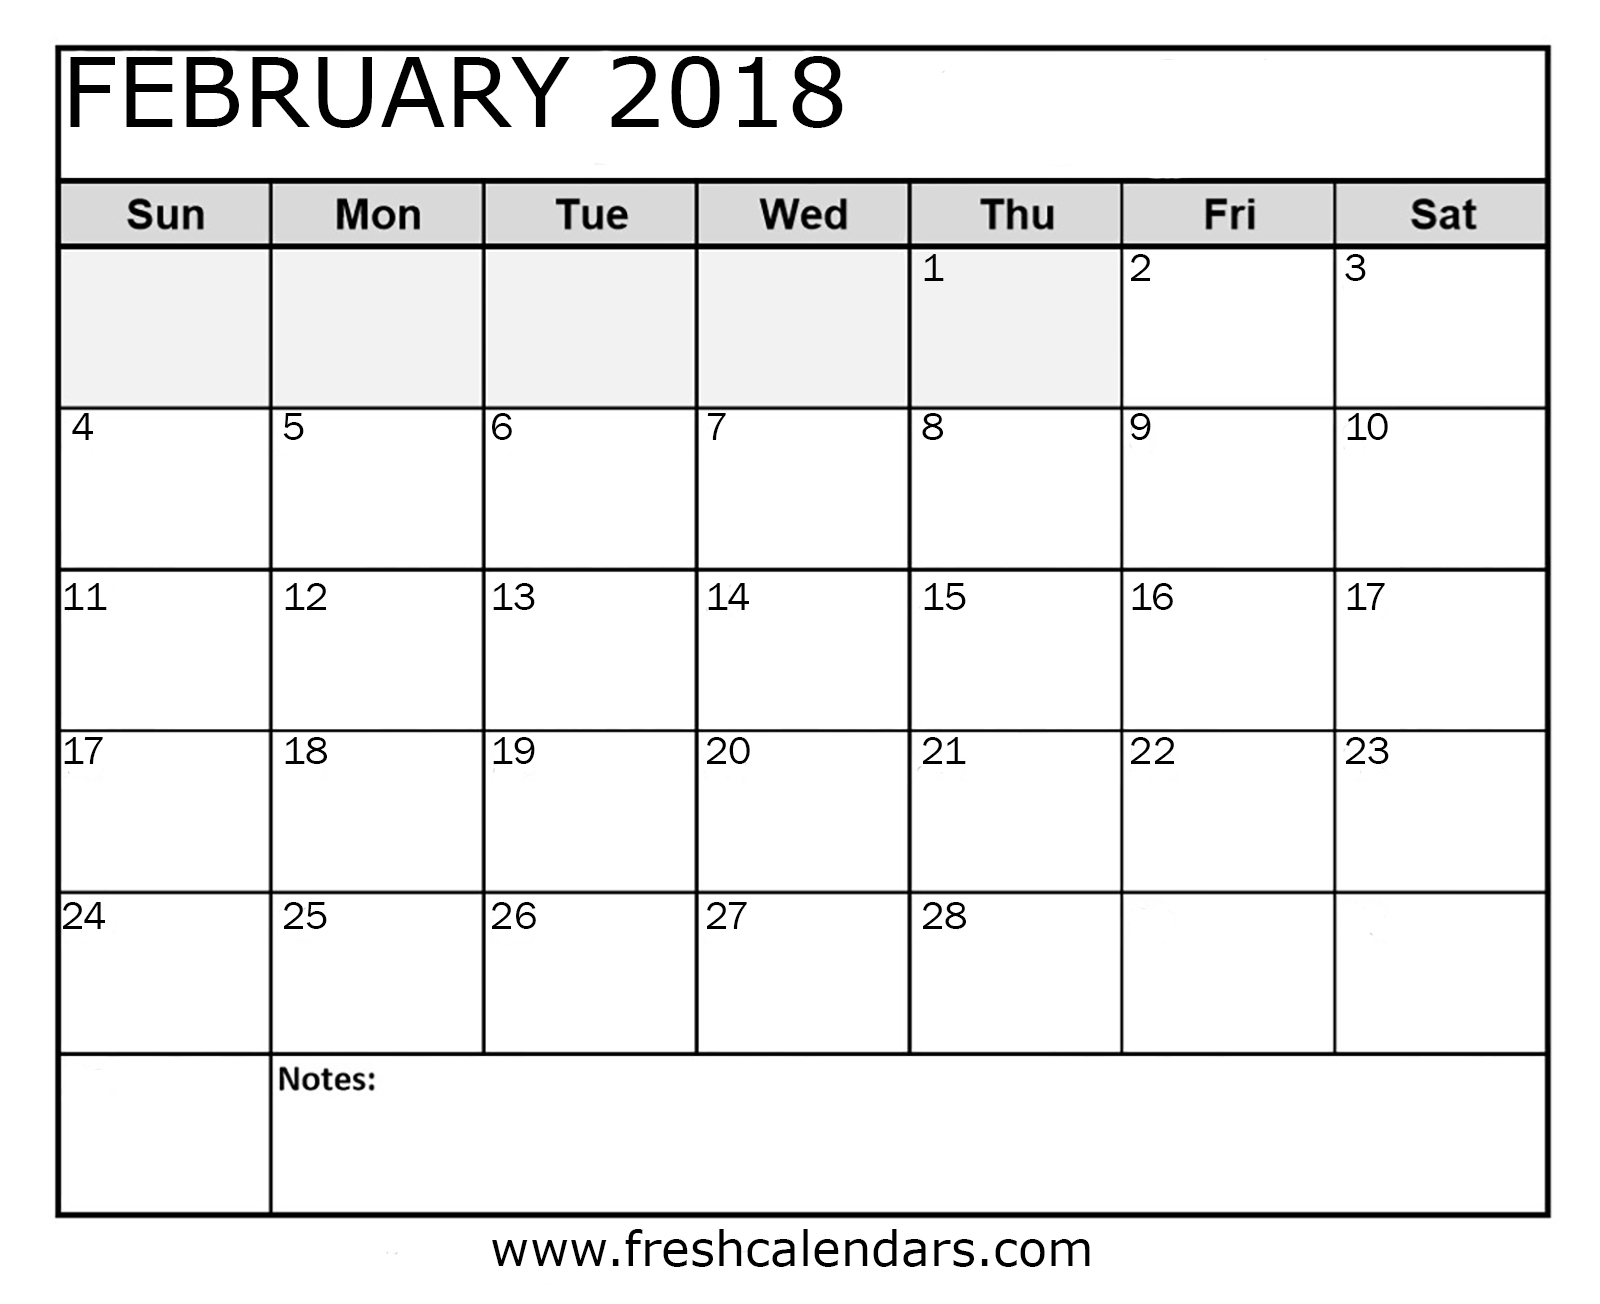 february-calendar-printable-word-pdf-format-with-notes-free-images-at